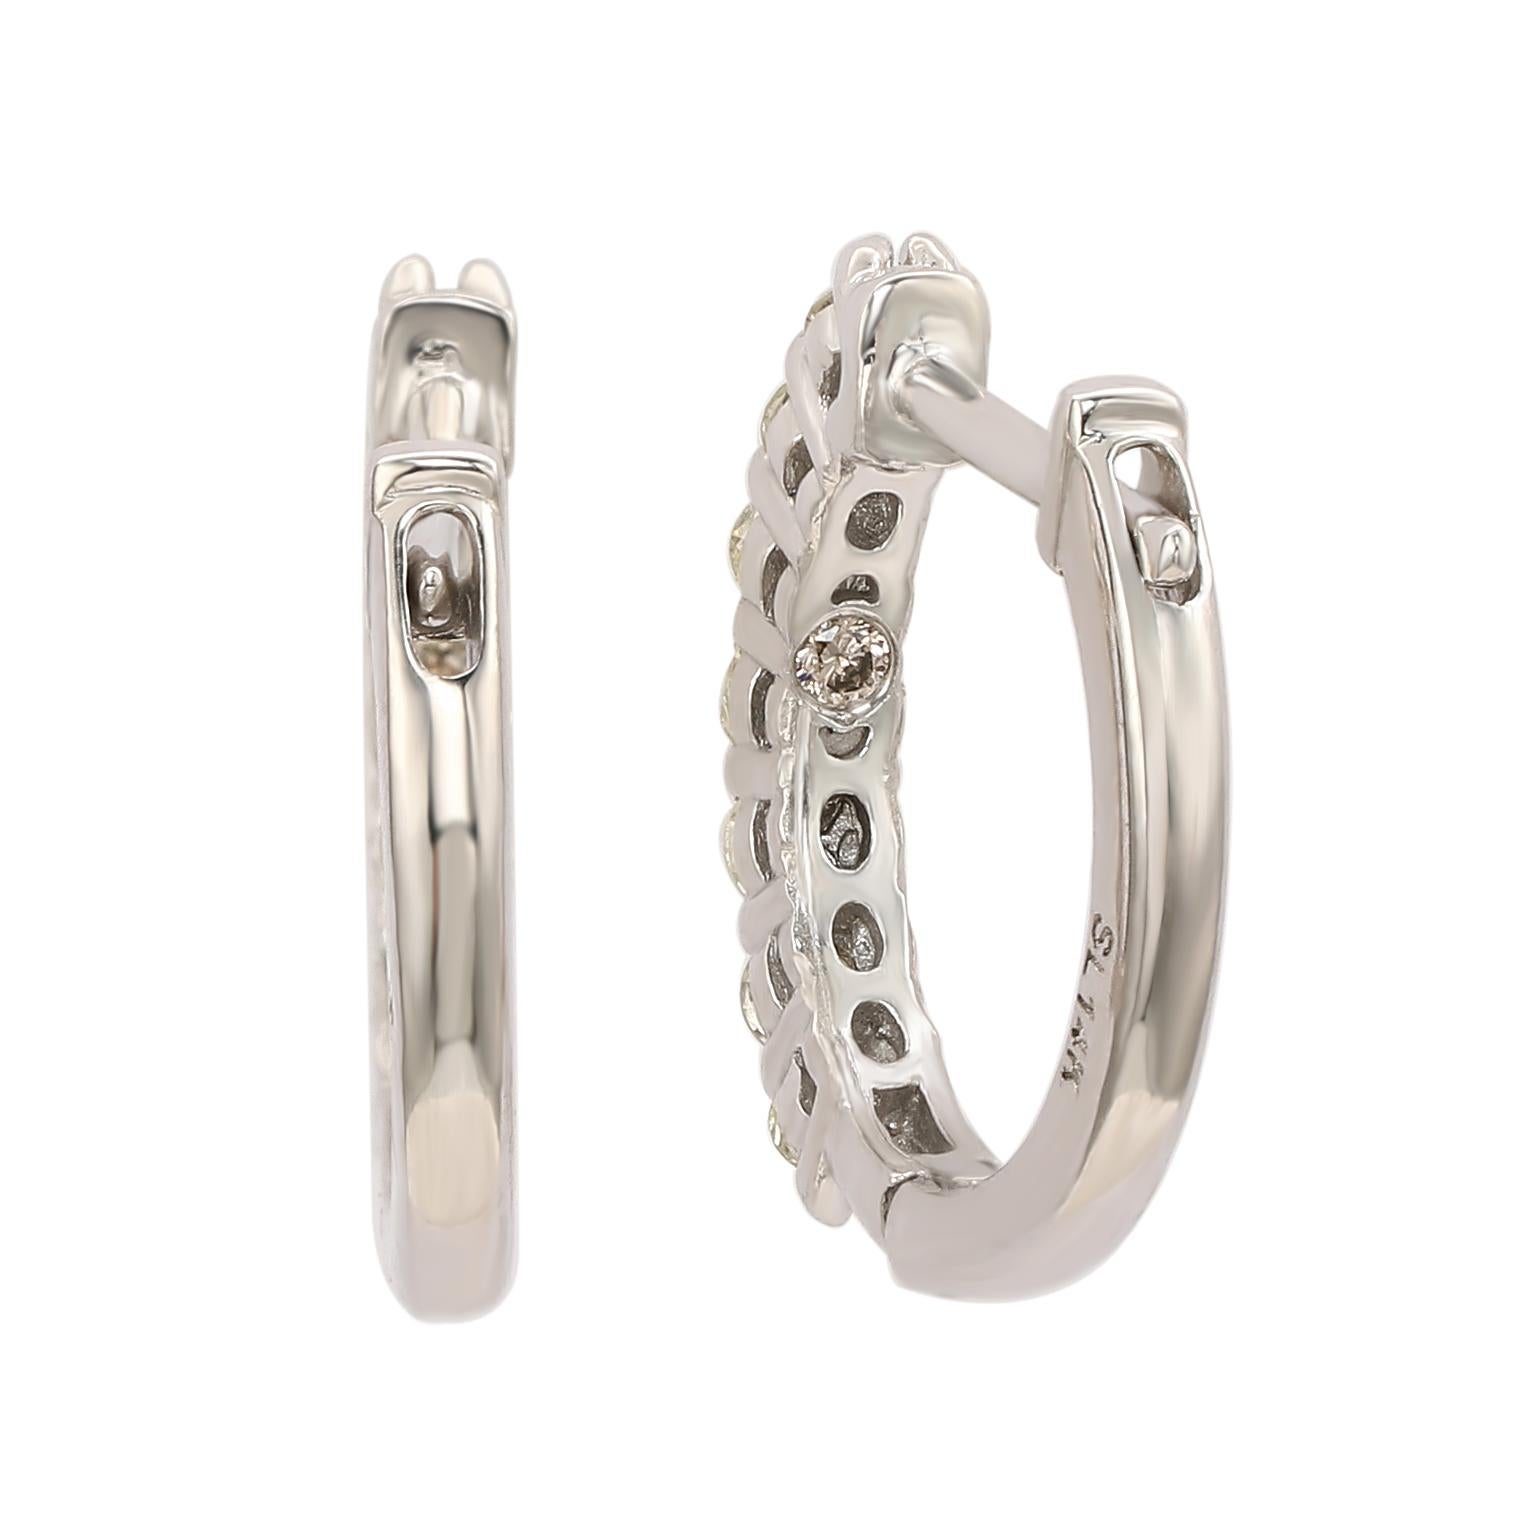 Suzy Levian's 14k white gold hoop earrings feature an outer design studded with 14 round cut diamonds (1.40ct. t.w.). Approximate diameter: 20 mm. Jewelry Type: Fine
Gold Karat: 14k
Total Diamond Weight: 1.40 CTTW
Diamond Cut: Round
Style: Hoop,